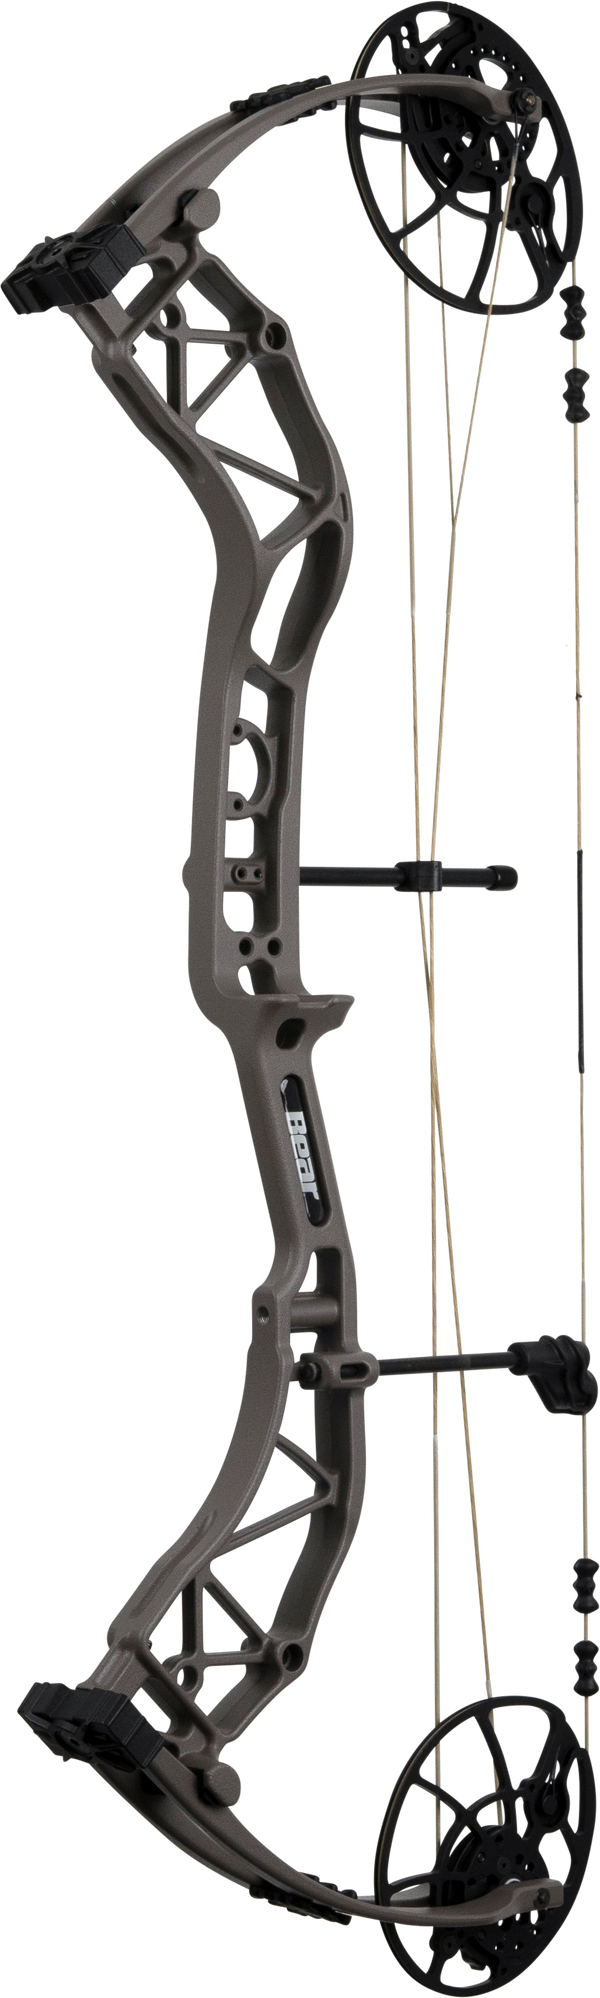 Bear Archery Legend XR Compound Bow for Hunting 